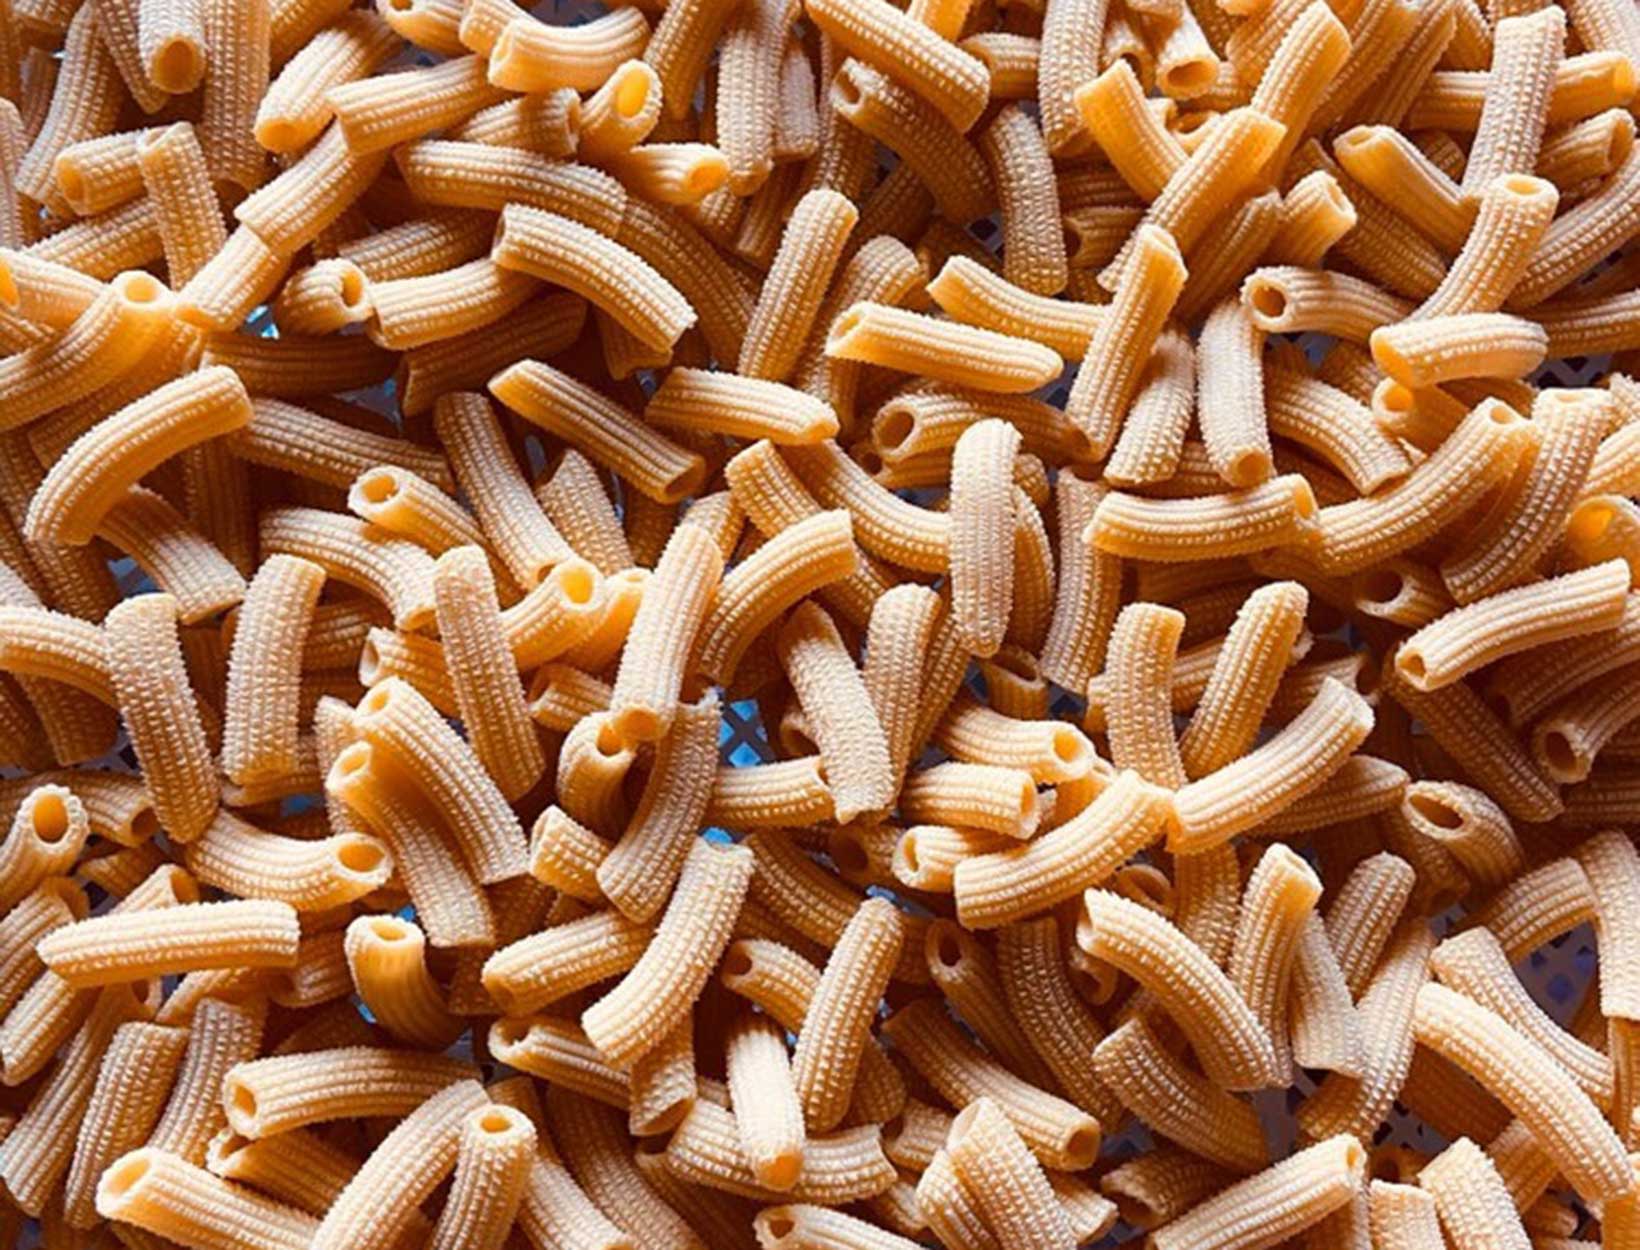 Pasta by the Pound, DIY Sewing Kits, and 13 Other Things We’re Talking About